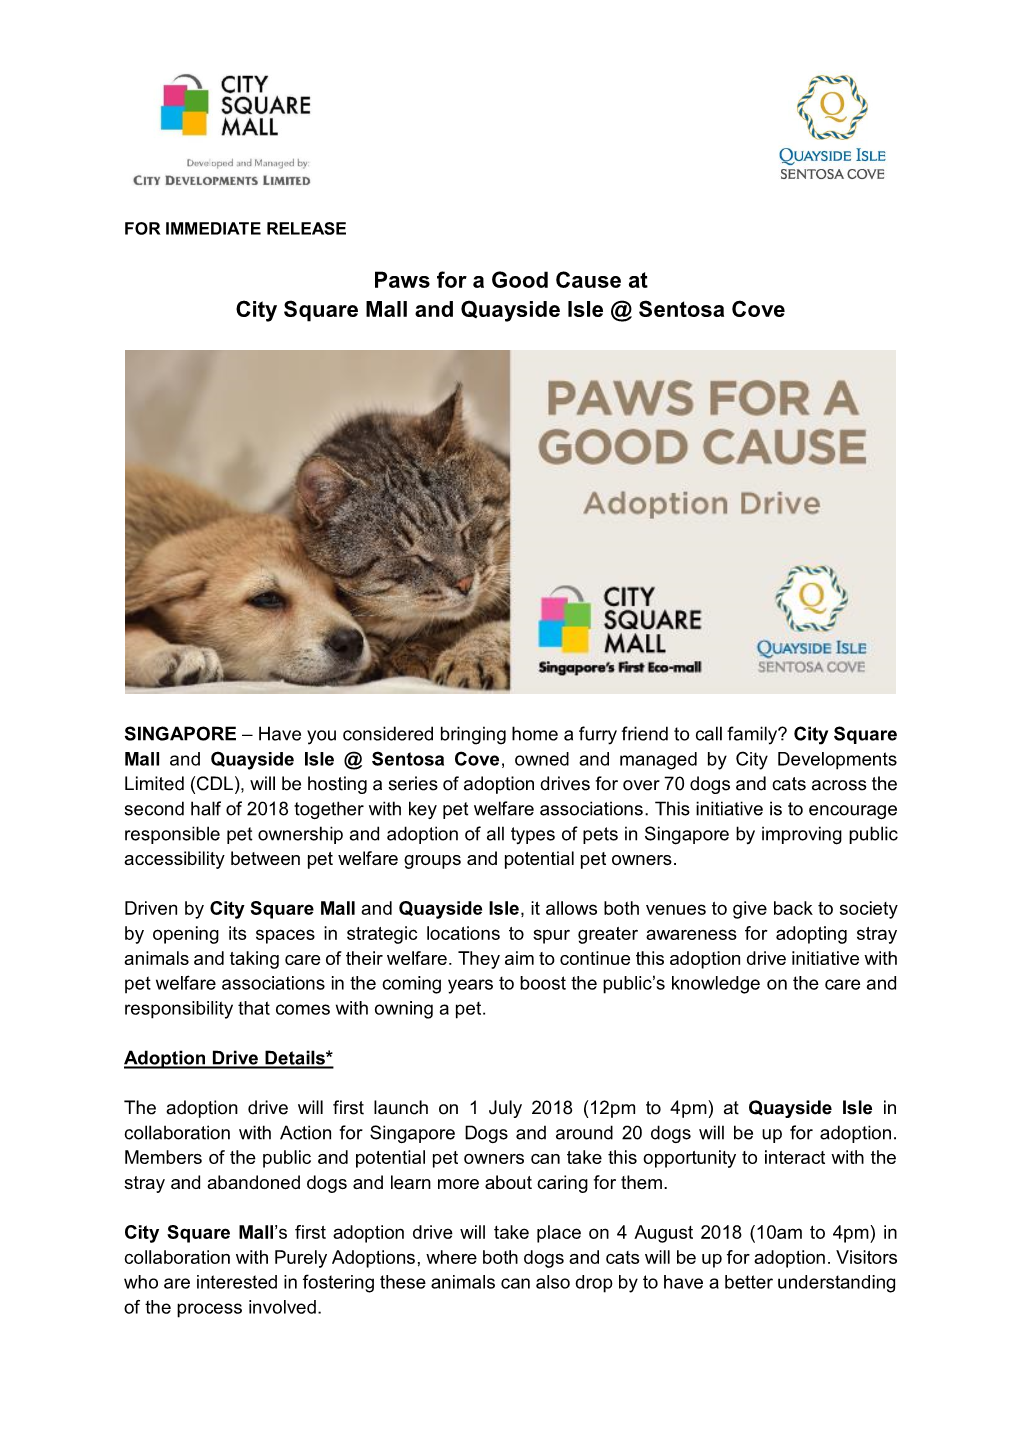 Paws for a Good Cause at City Square Mall and Quayside Isle @ Sentosa Cove